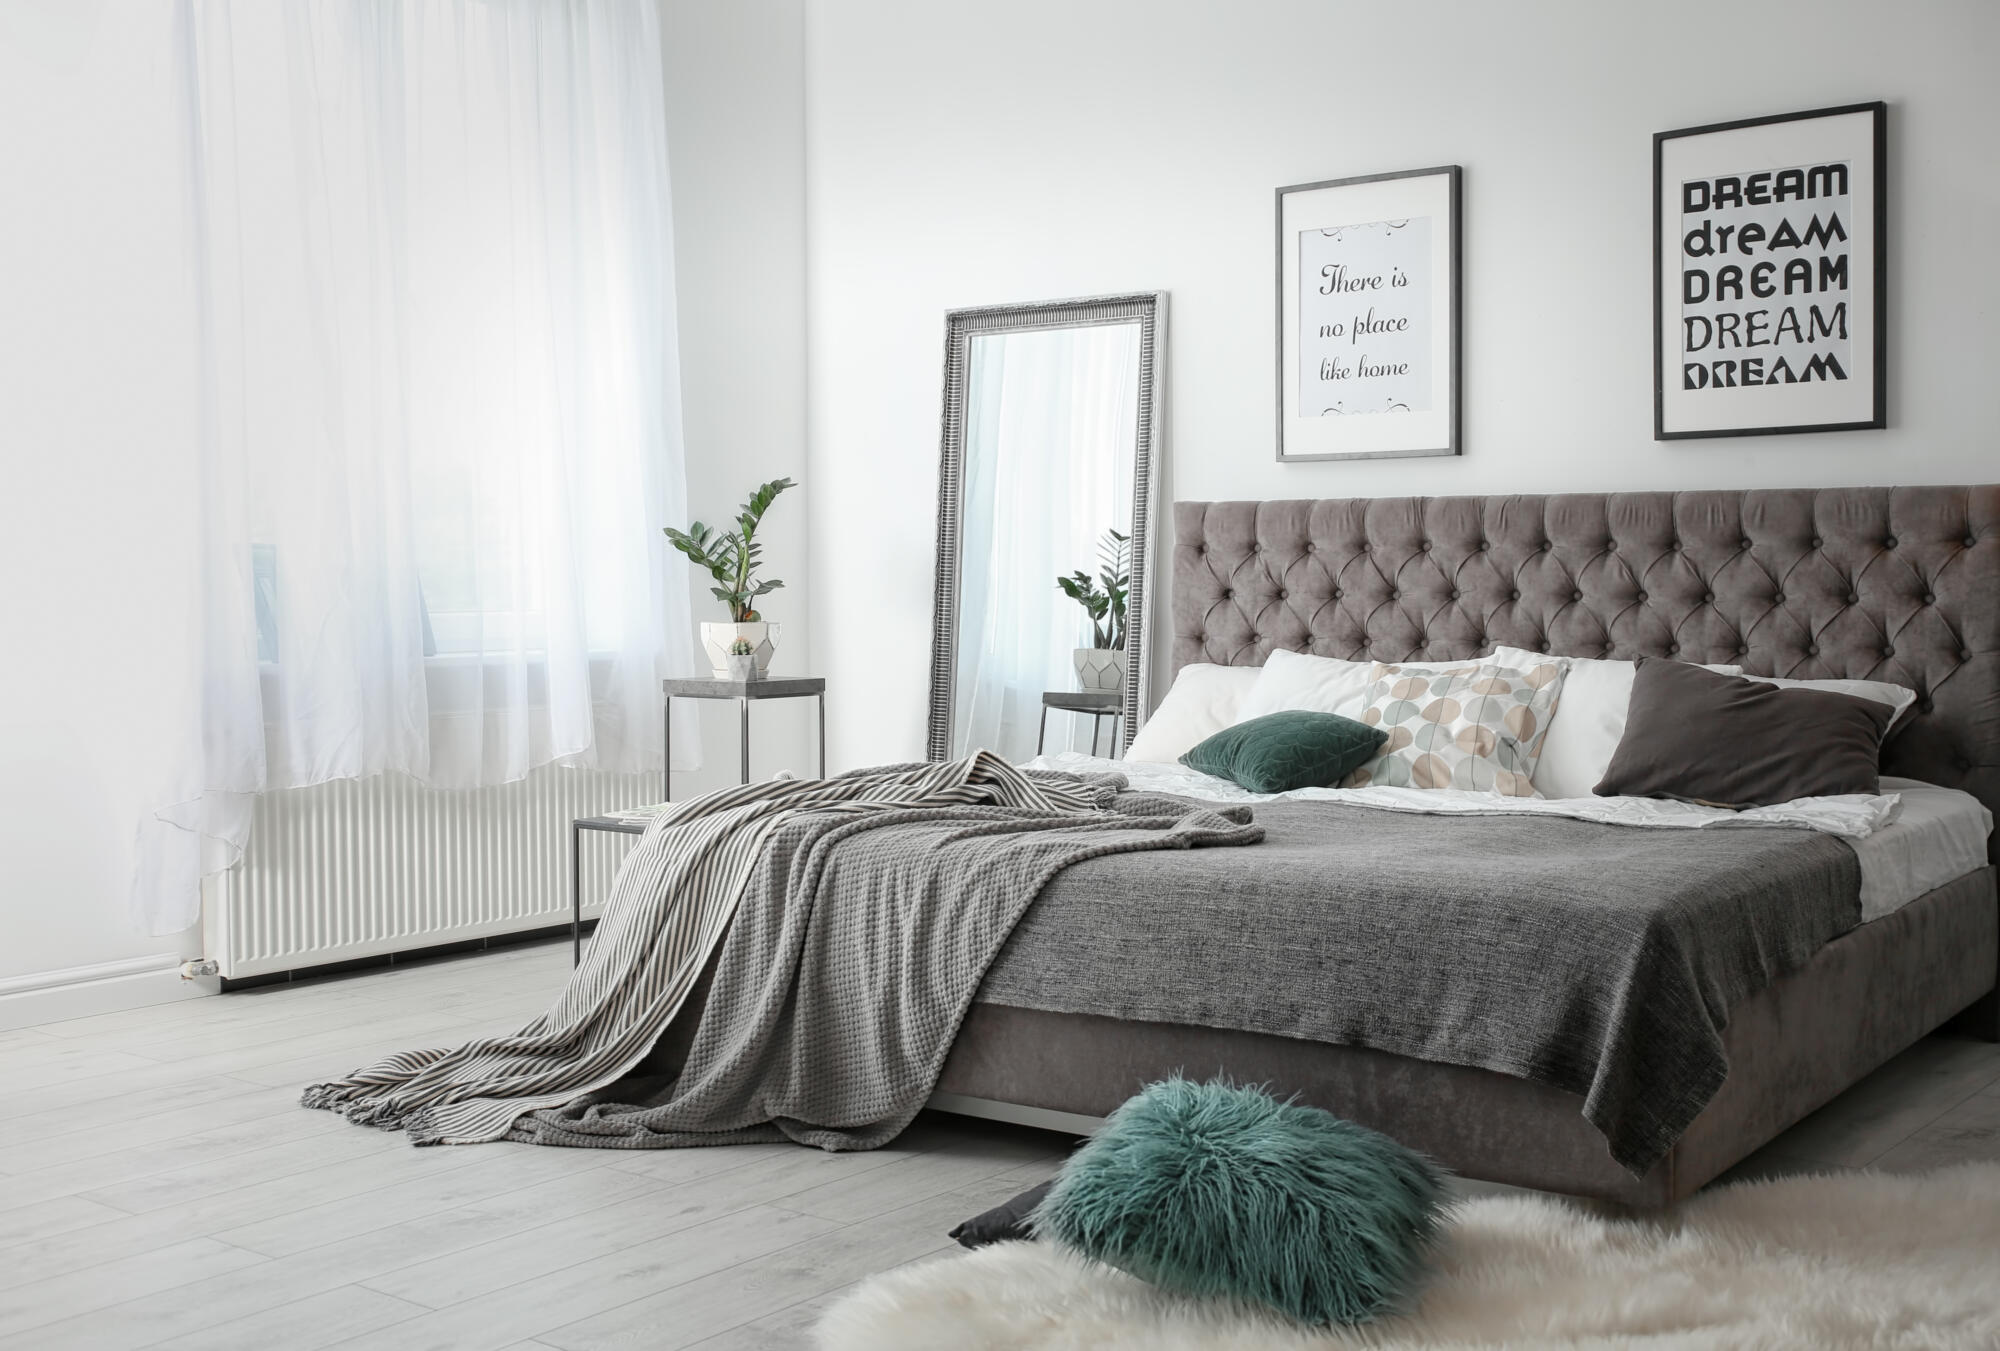 A minimalist bedroom design with a grey bed and green pillows.